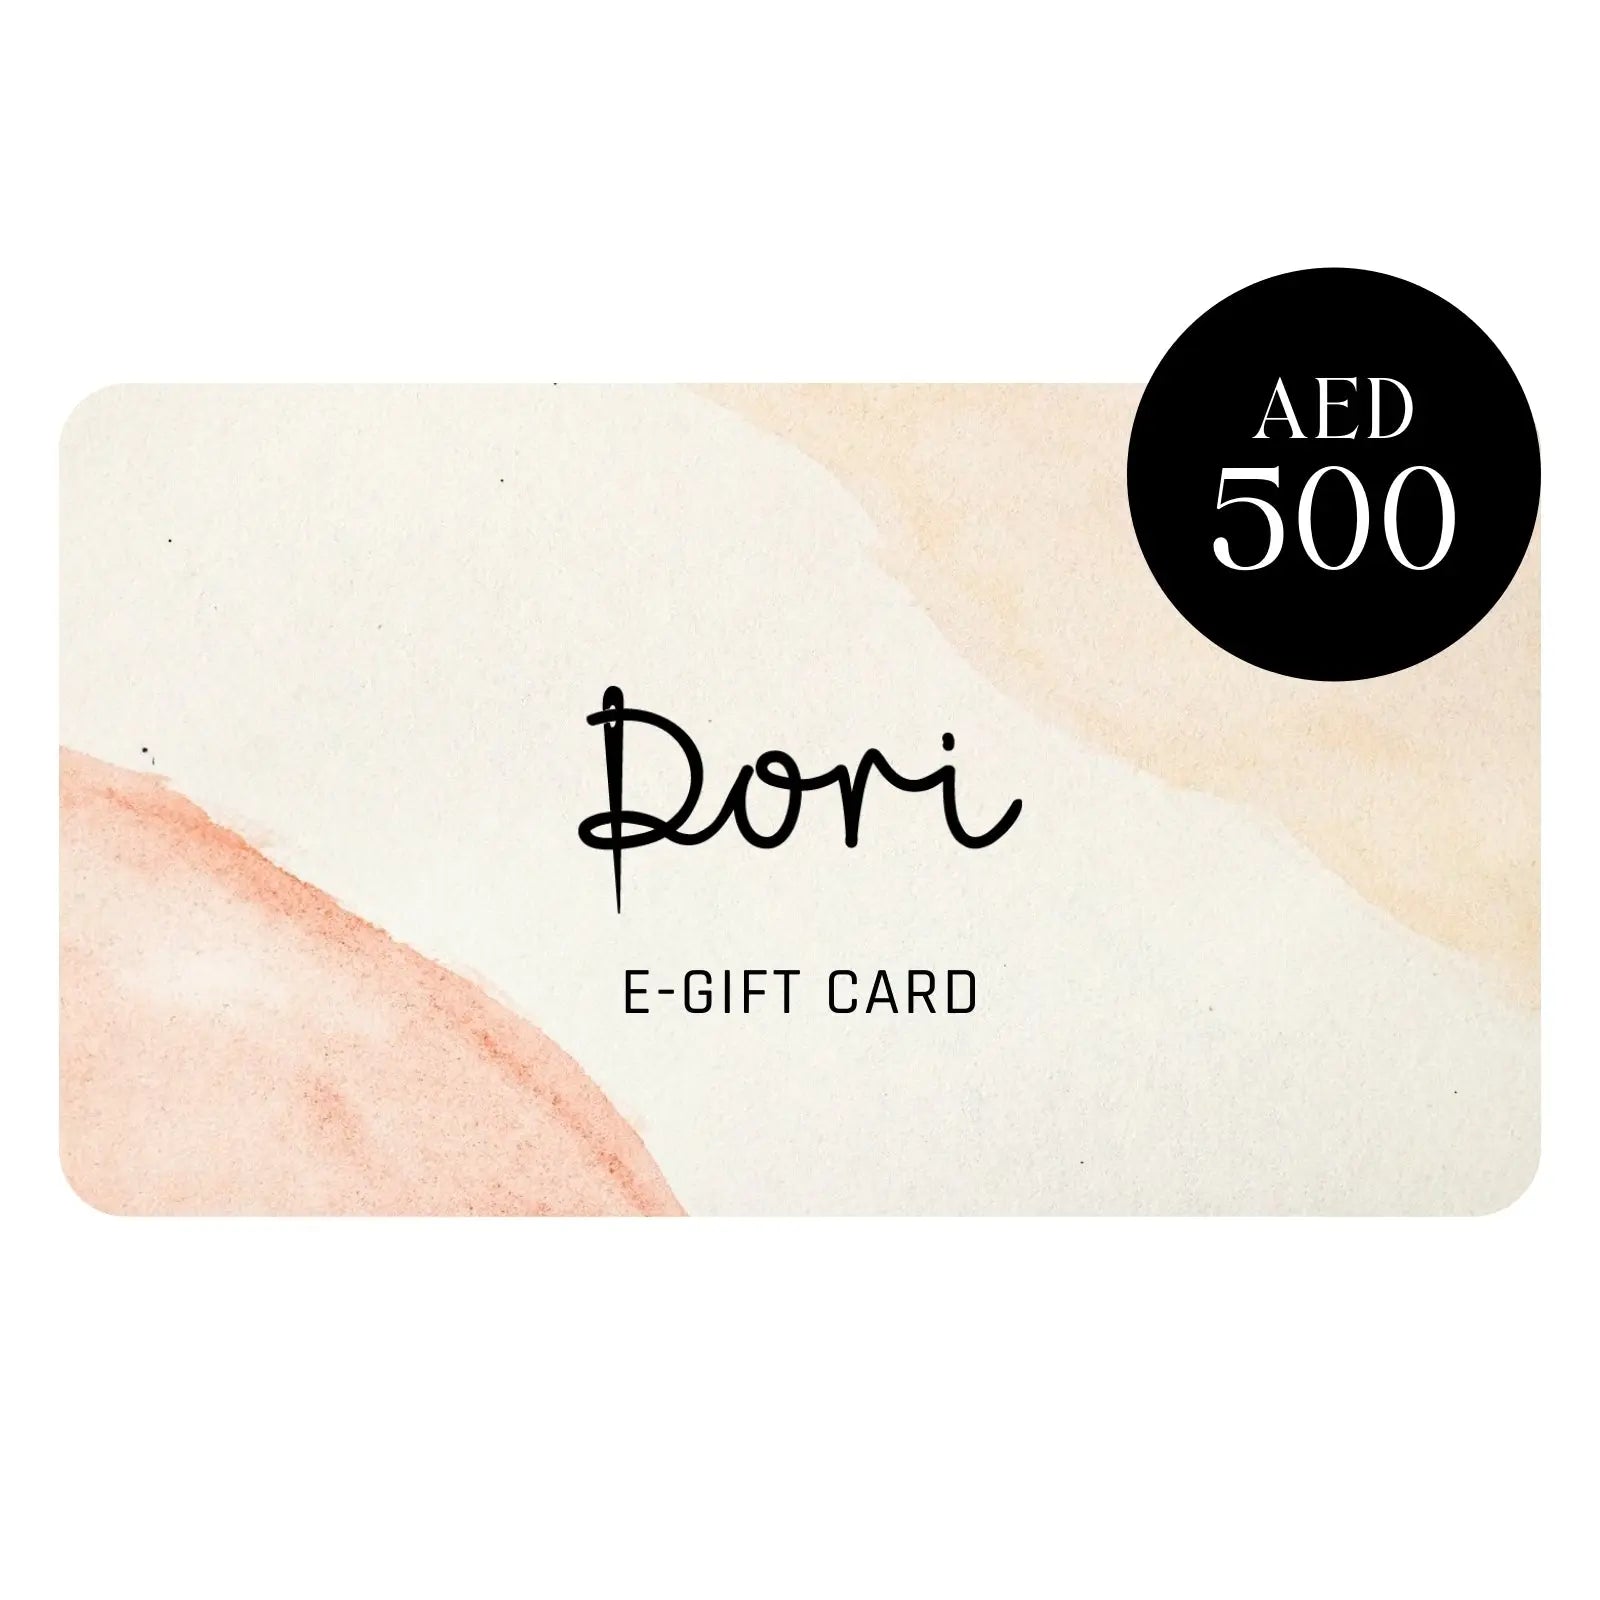 E-Gift Card (AED 500)- Handcrafted Jewellery from Dori